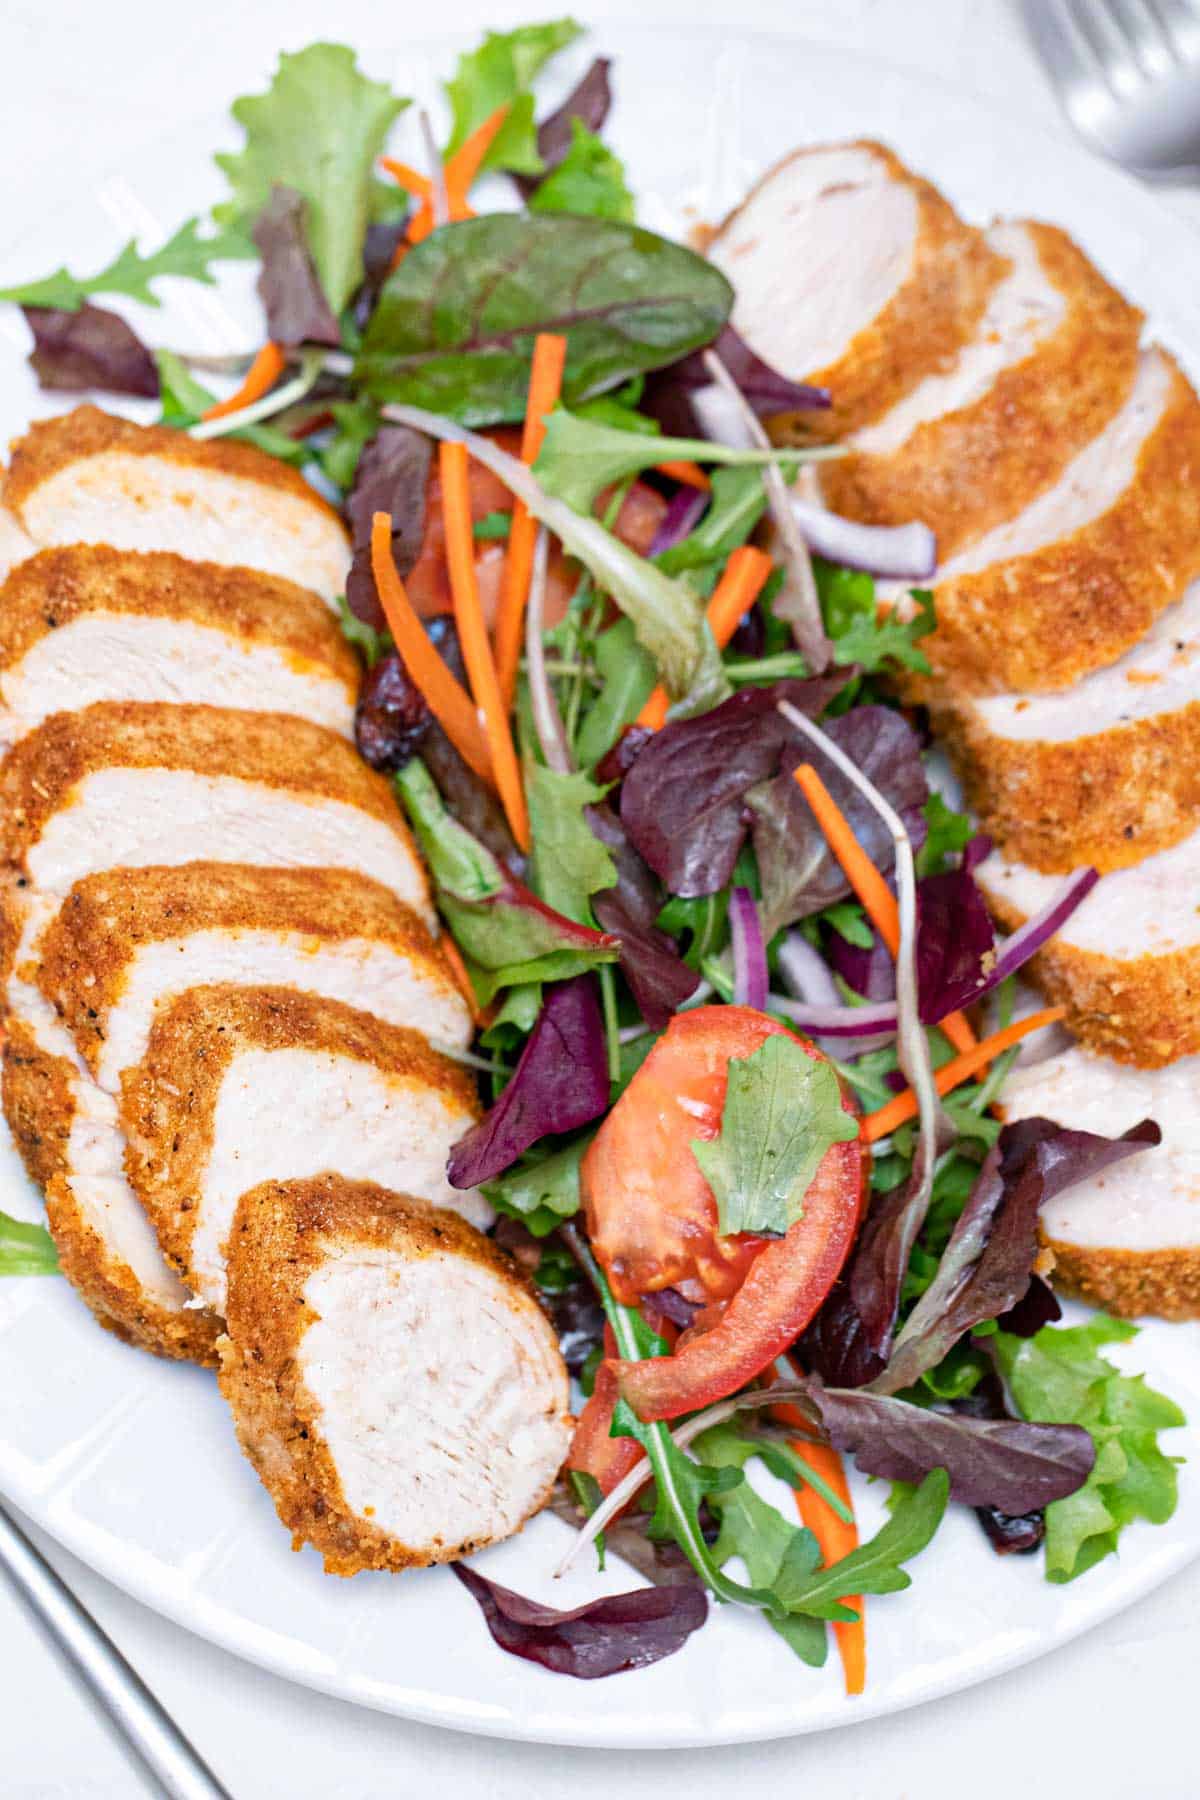 top down view of the completed air fryer chicken breast sliced and served with salad greens